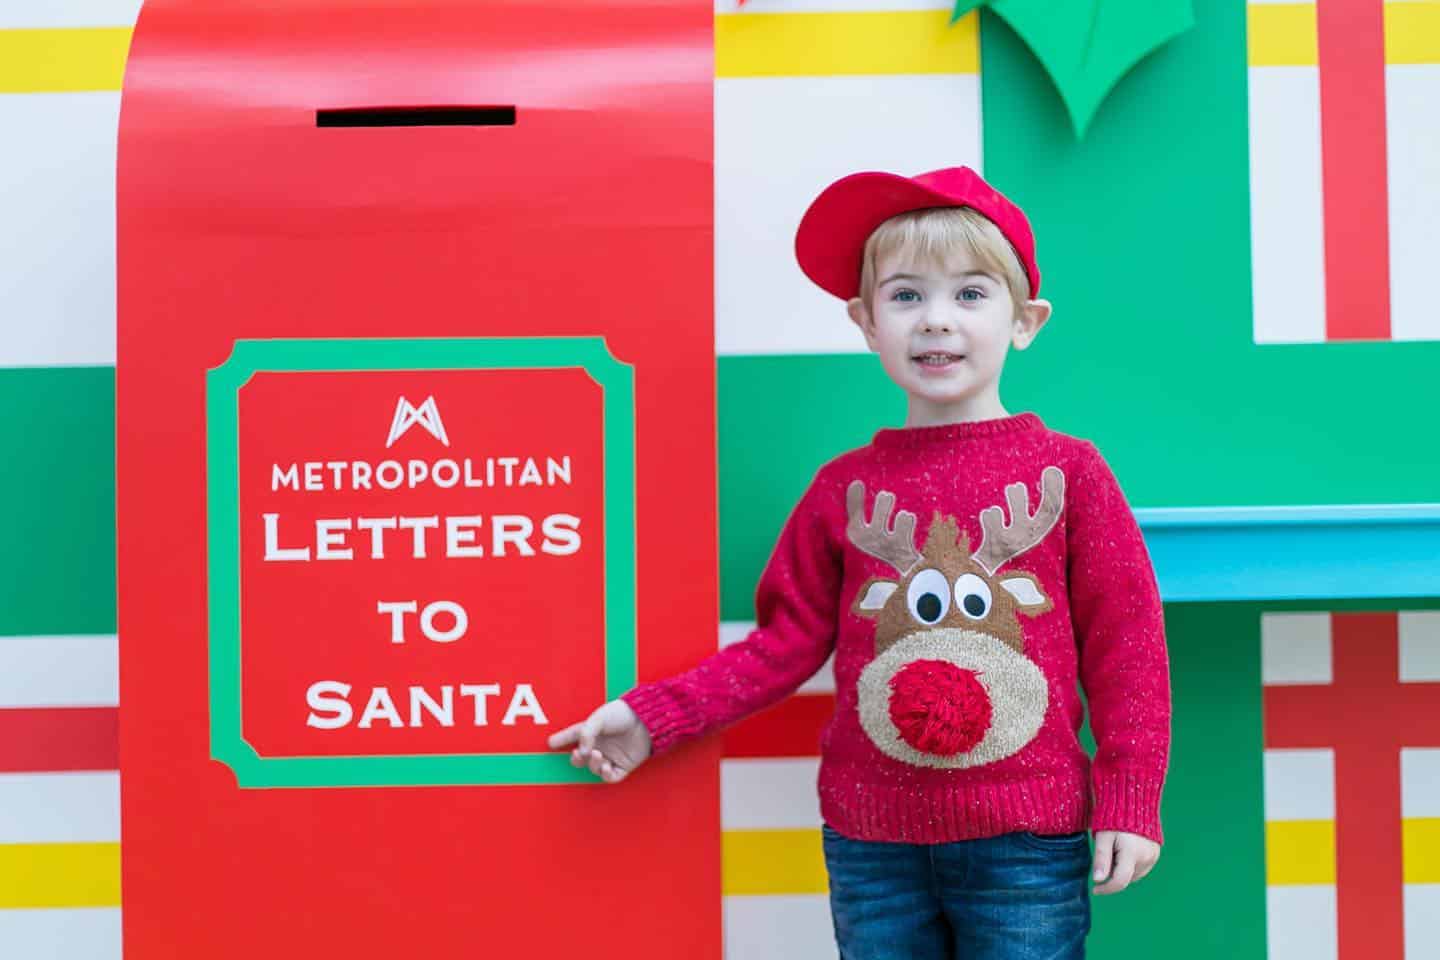 Join us for Merry Midtown — a month long celebration to bring in the holiday season! ⁣
⁣
MERRY MIDTOWN⁣ CALENDAR —
? VTGCLT Pop: Now - Dec 22⁣
 Letters to Santa: Nov 23 - Dec 23⁣
 Holiday Market: December 4⁣
? Photos with Santa: December 11⁣
 Grinchmas: December 18⁣
⁣
Visit the link in our bio for ALL the details! Questions? Send us a DM!